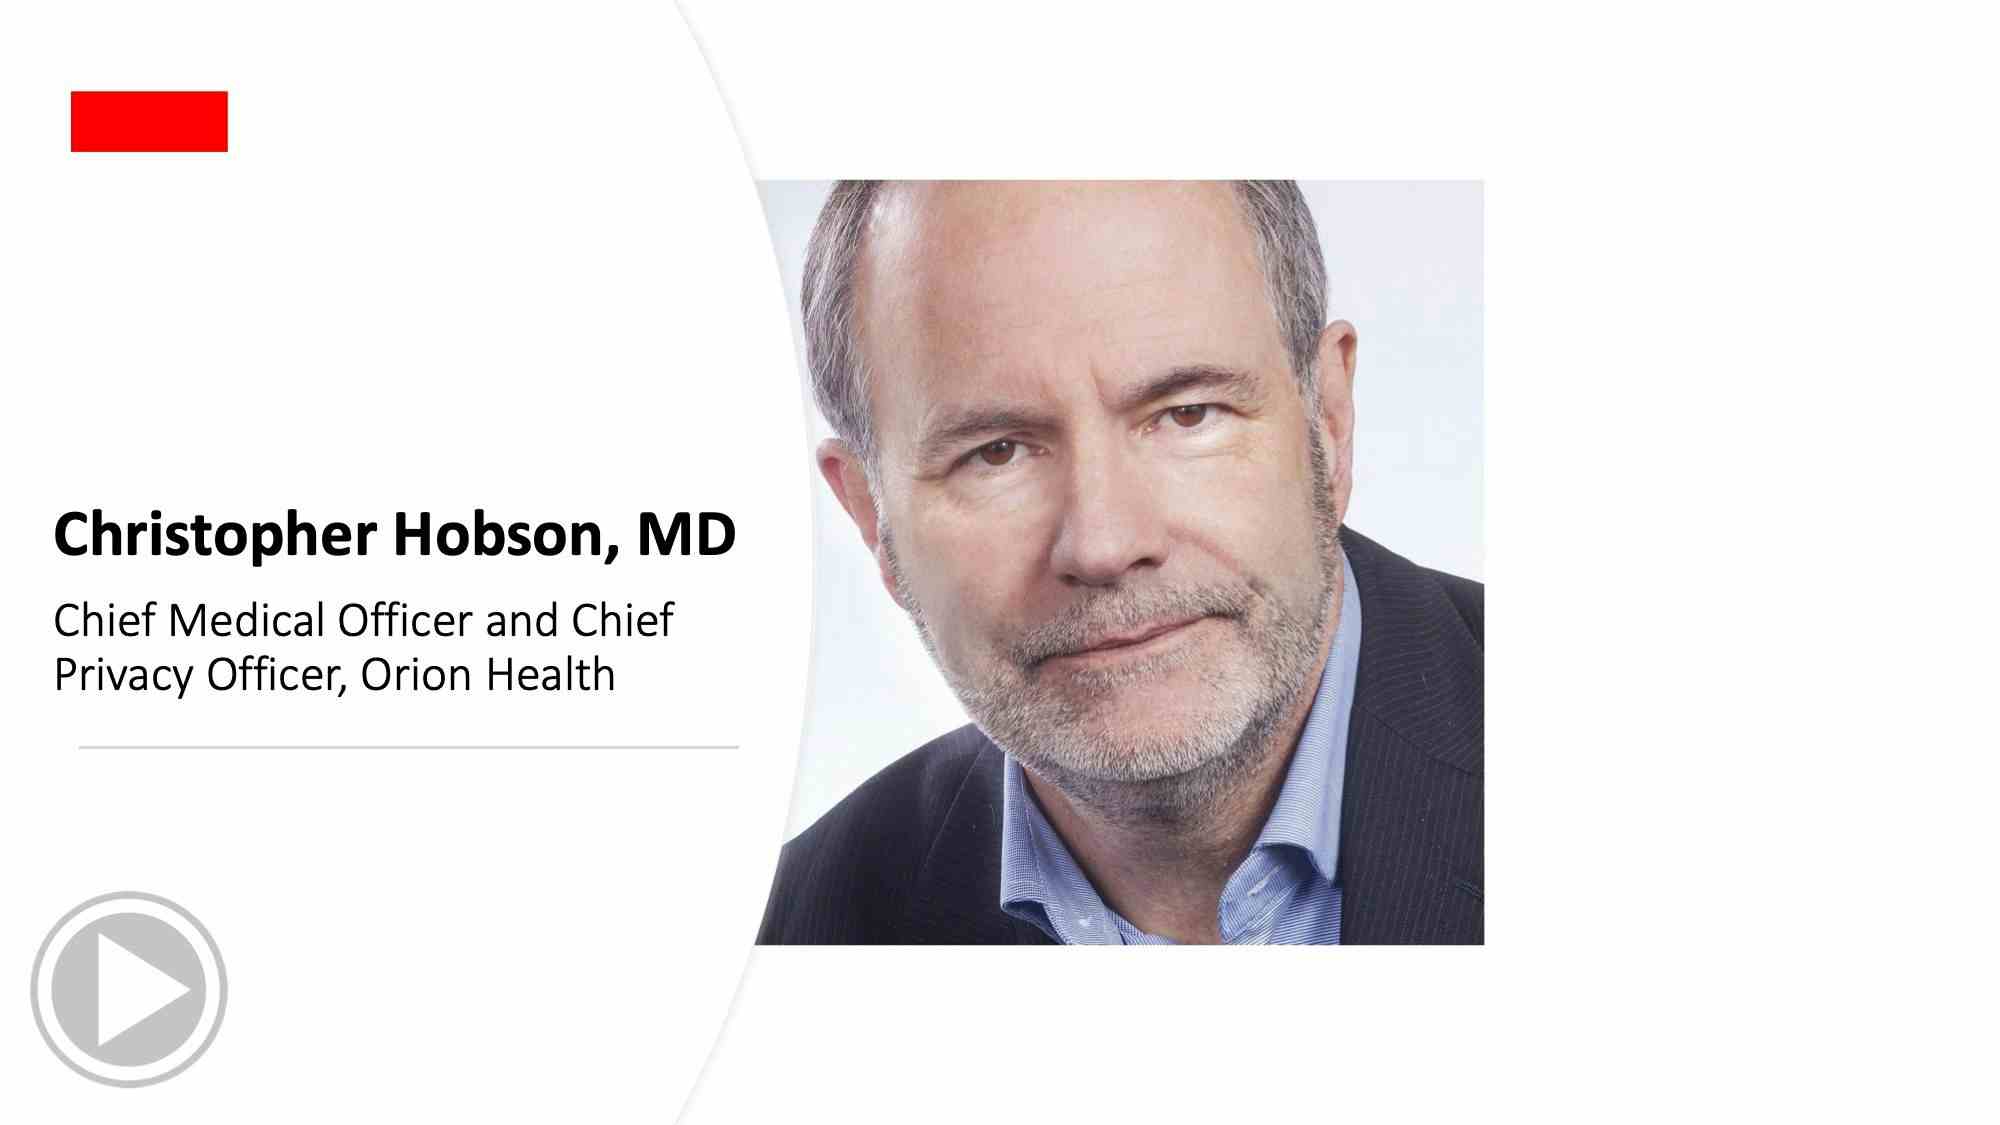 Christopher Hobson, MD, gives expert advice